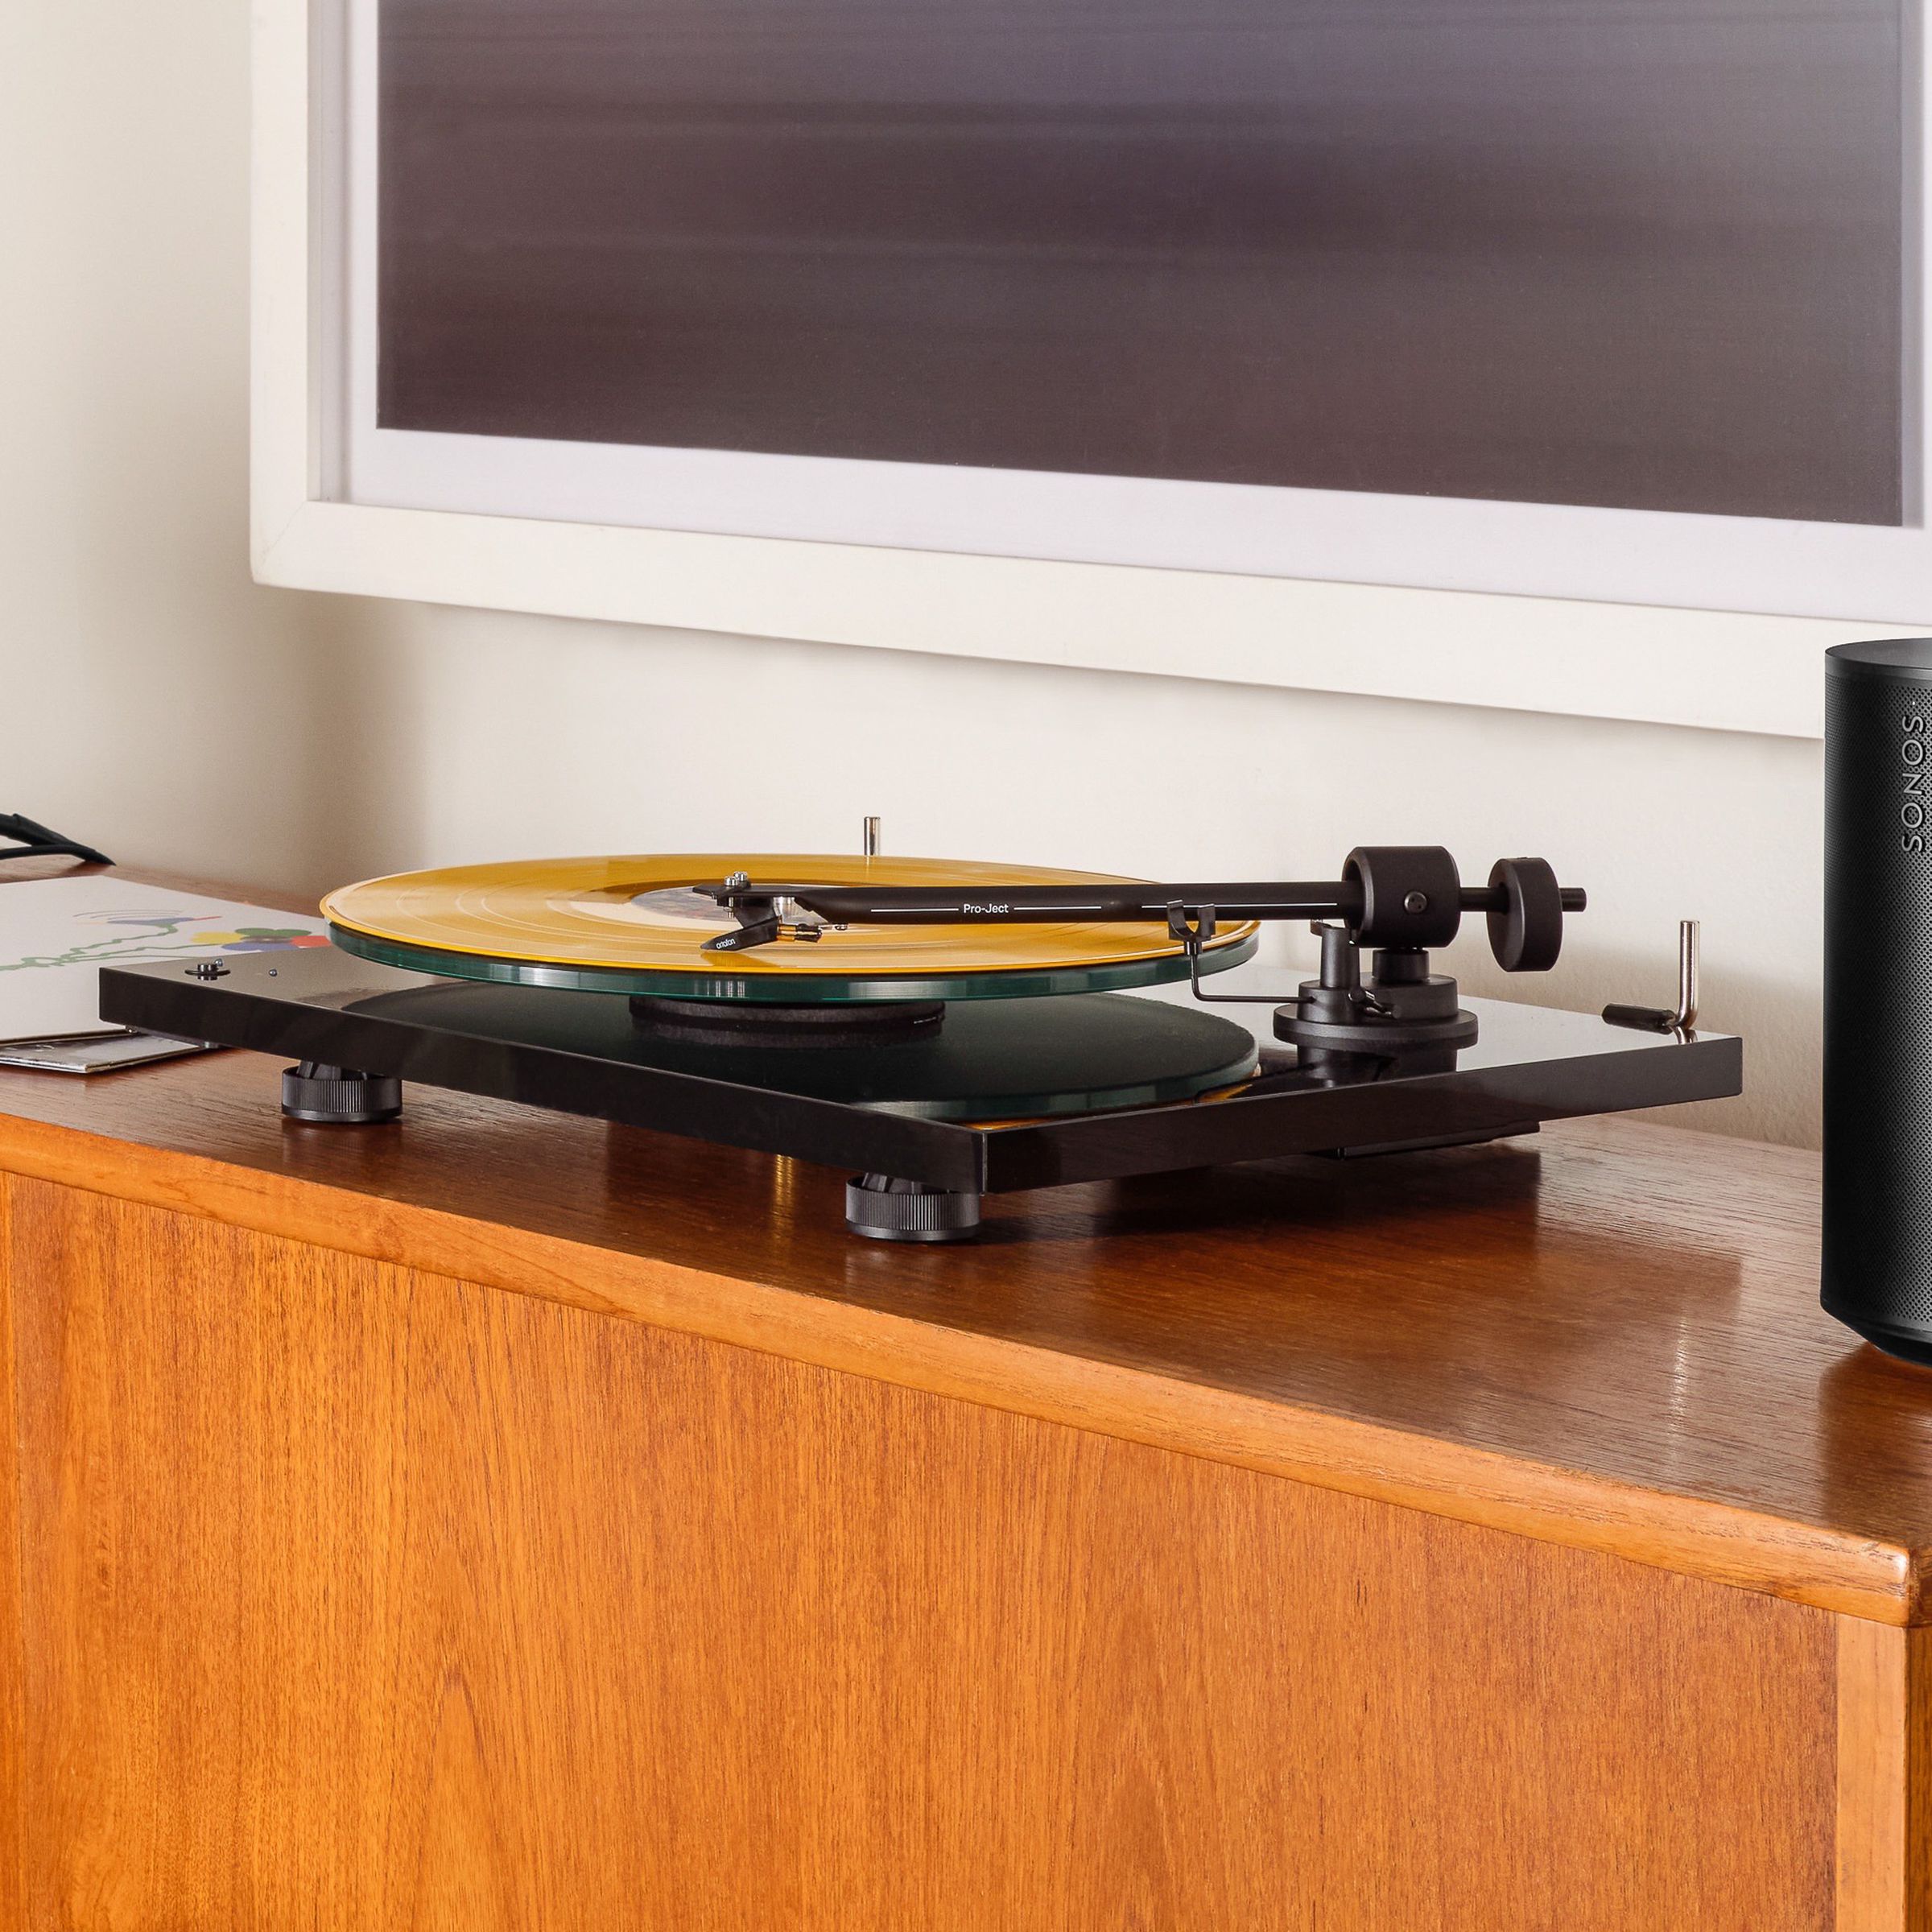 A marketing images of two Sonos Era 100 speakers with a turntable in the center.